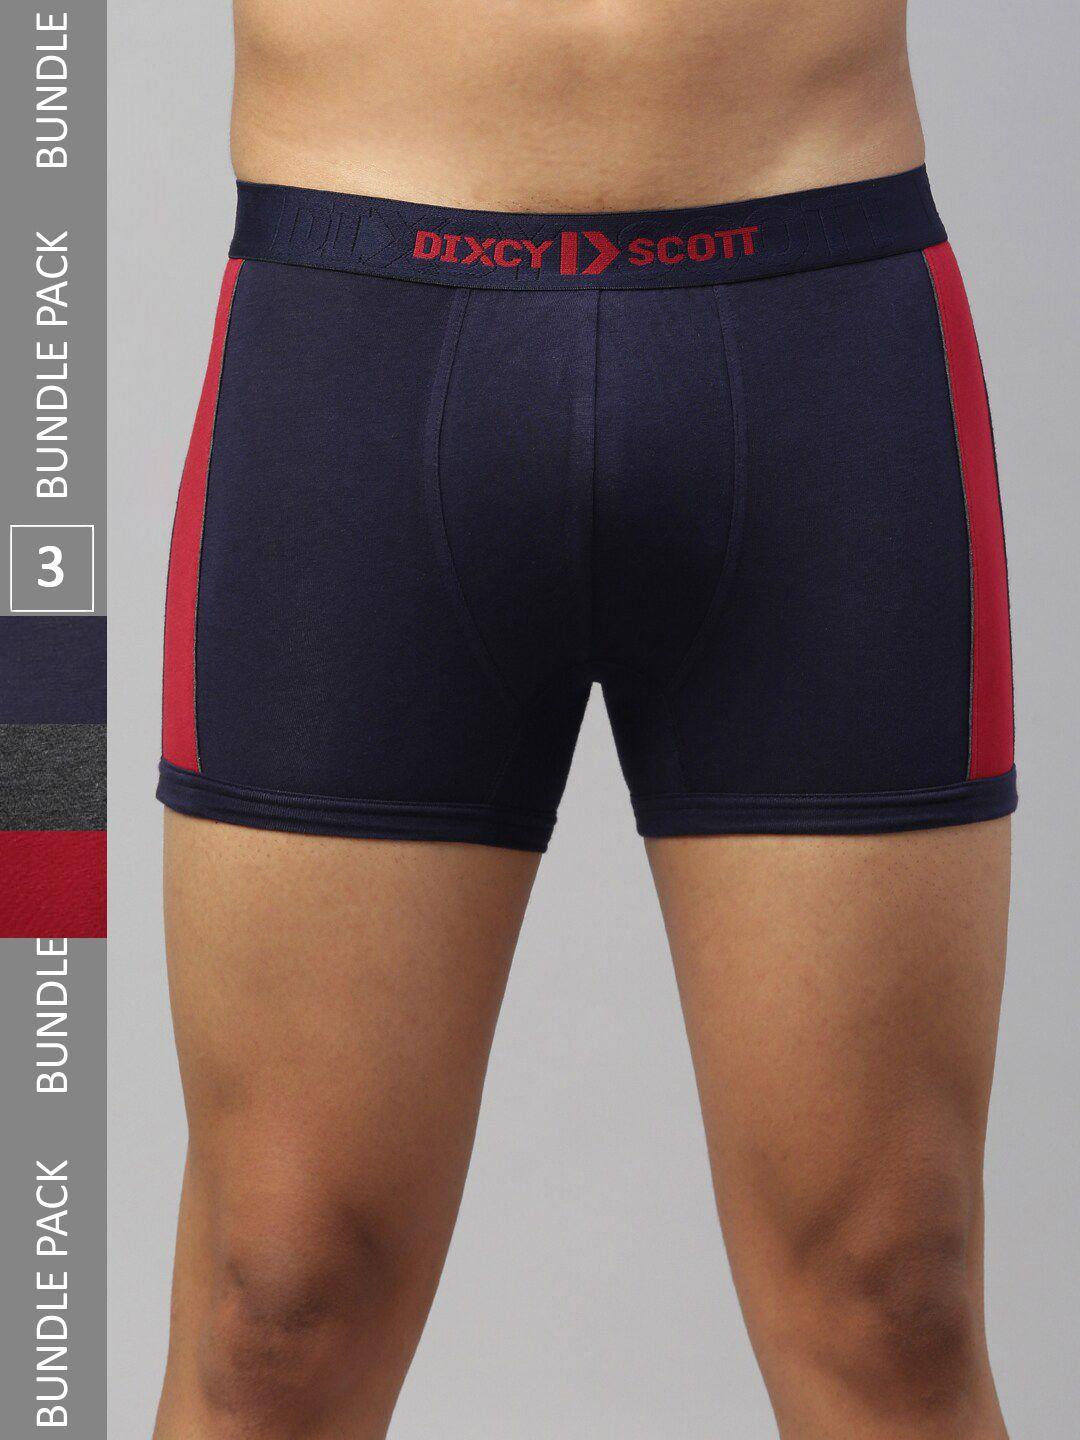 dixcy scott maximus men pack of 3 assorted cotton anti-microbial trunks